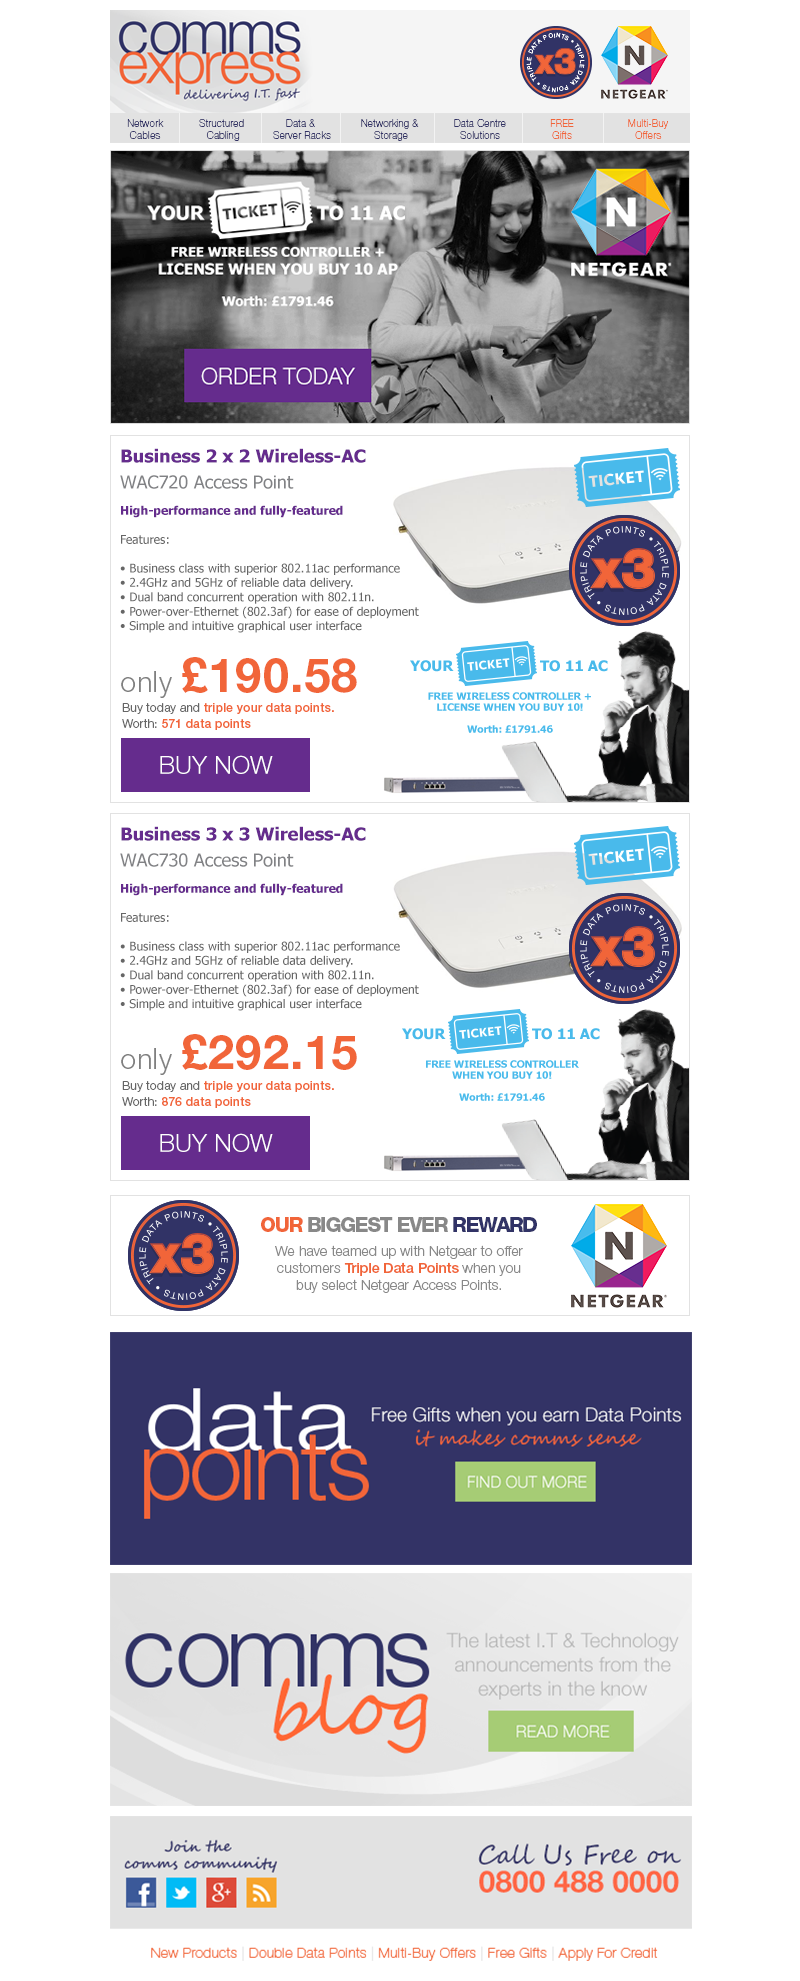 Our BIGGEST ever reward Your ticket to 11AC with Netgea